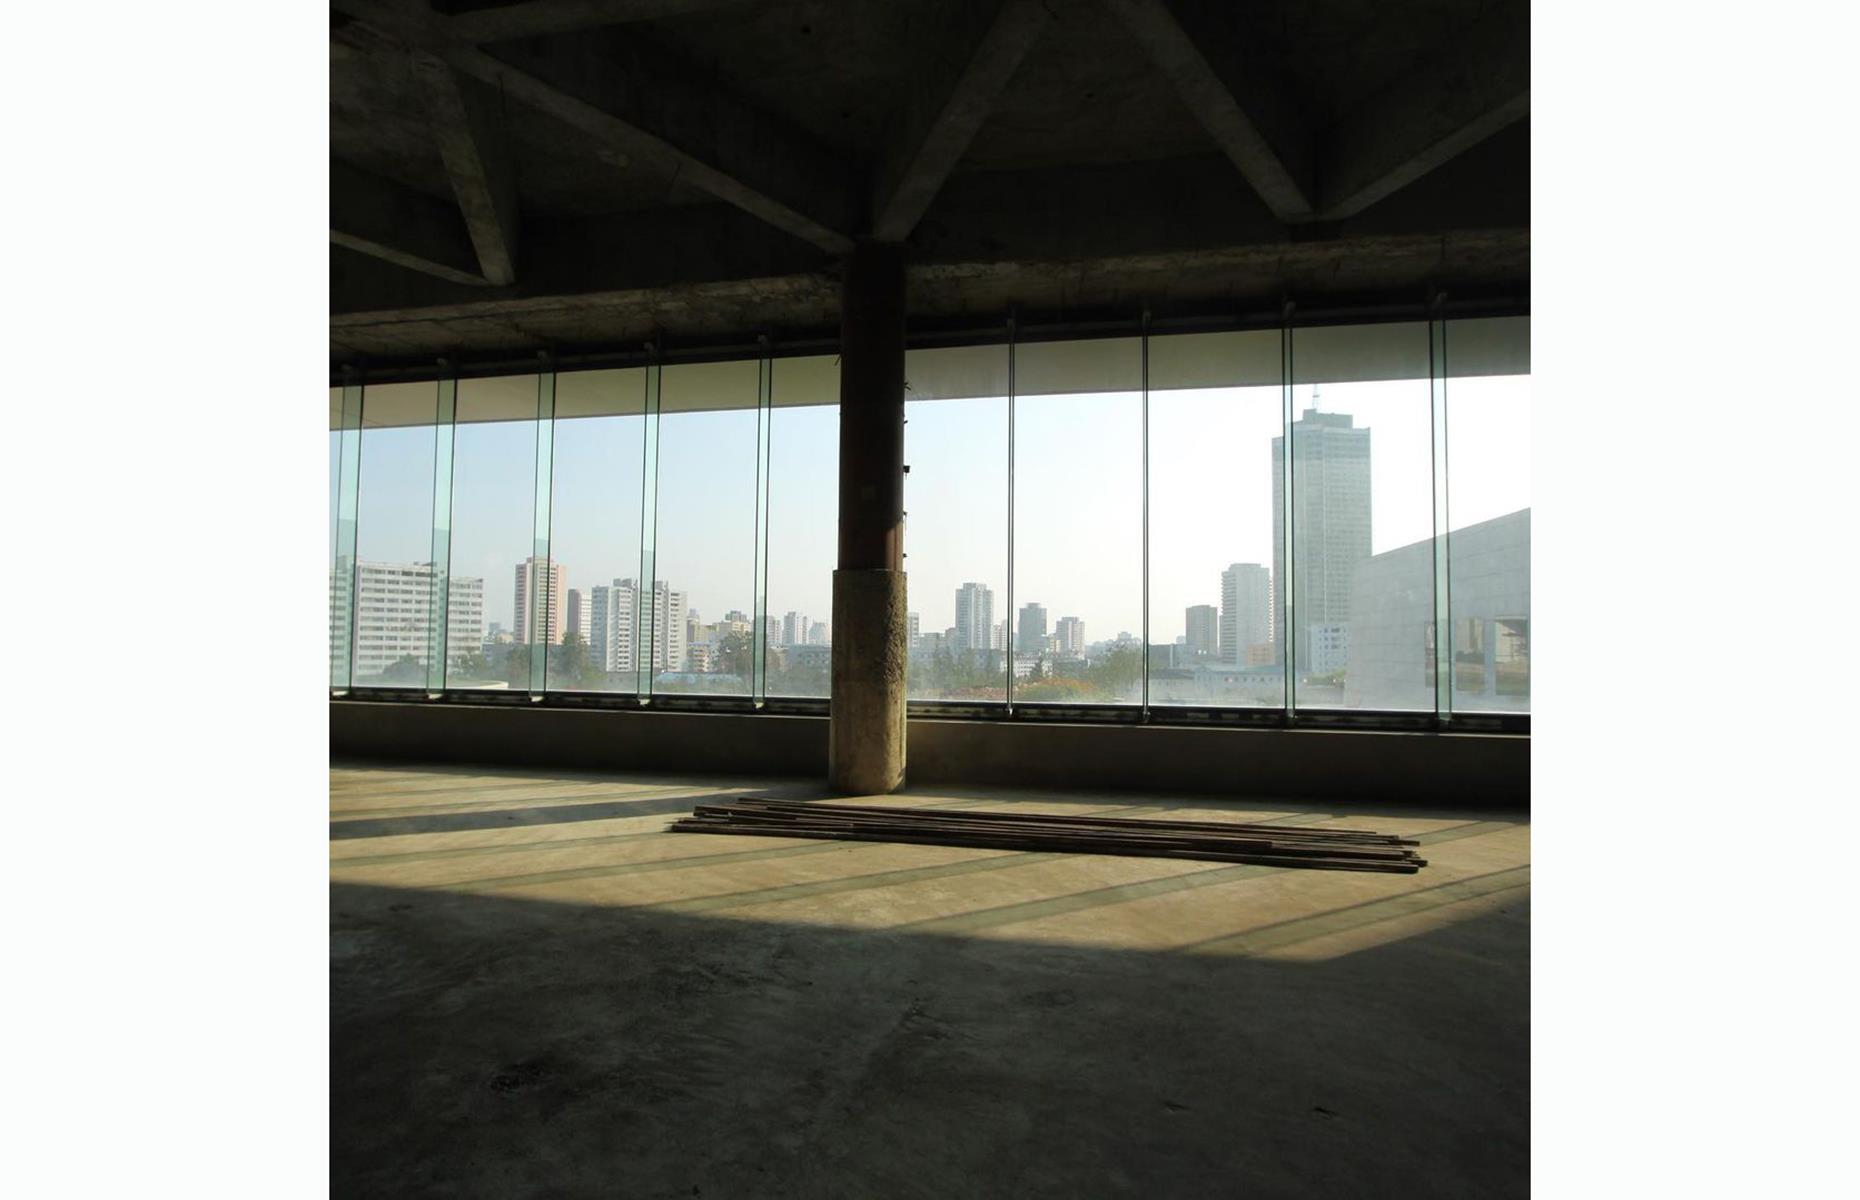 <p>Some parts of the building, like this interior cityscape view through floor-to-ceiling windows, wouldn't be out of place in any office block or undeveloped apartment block in any of the world's major cities.</p>